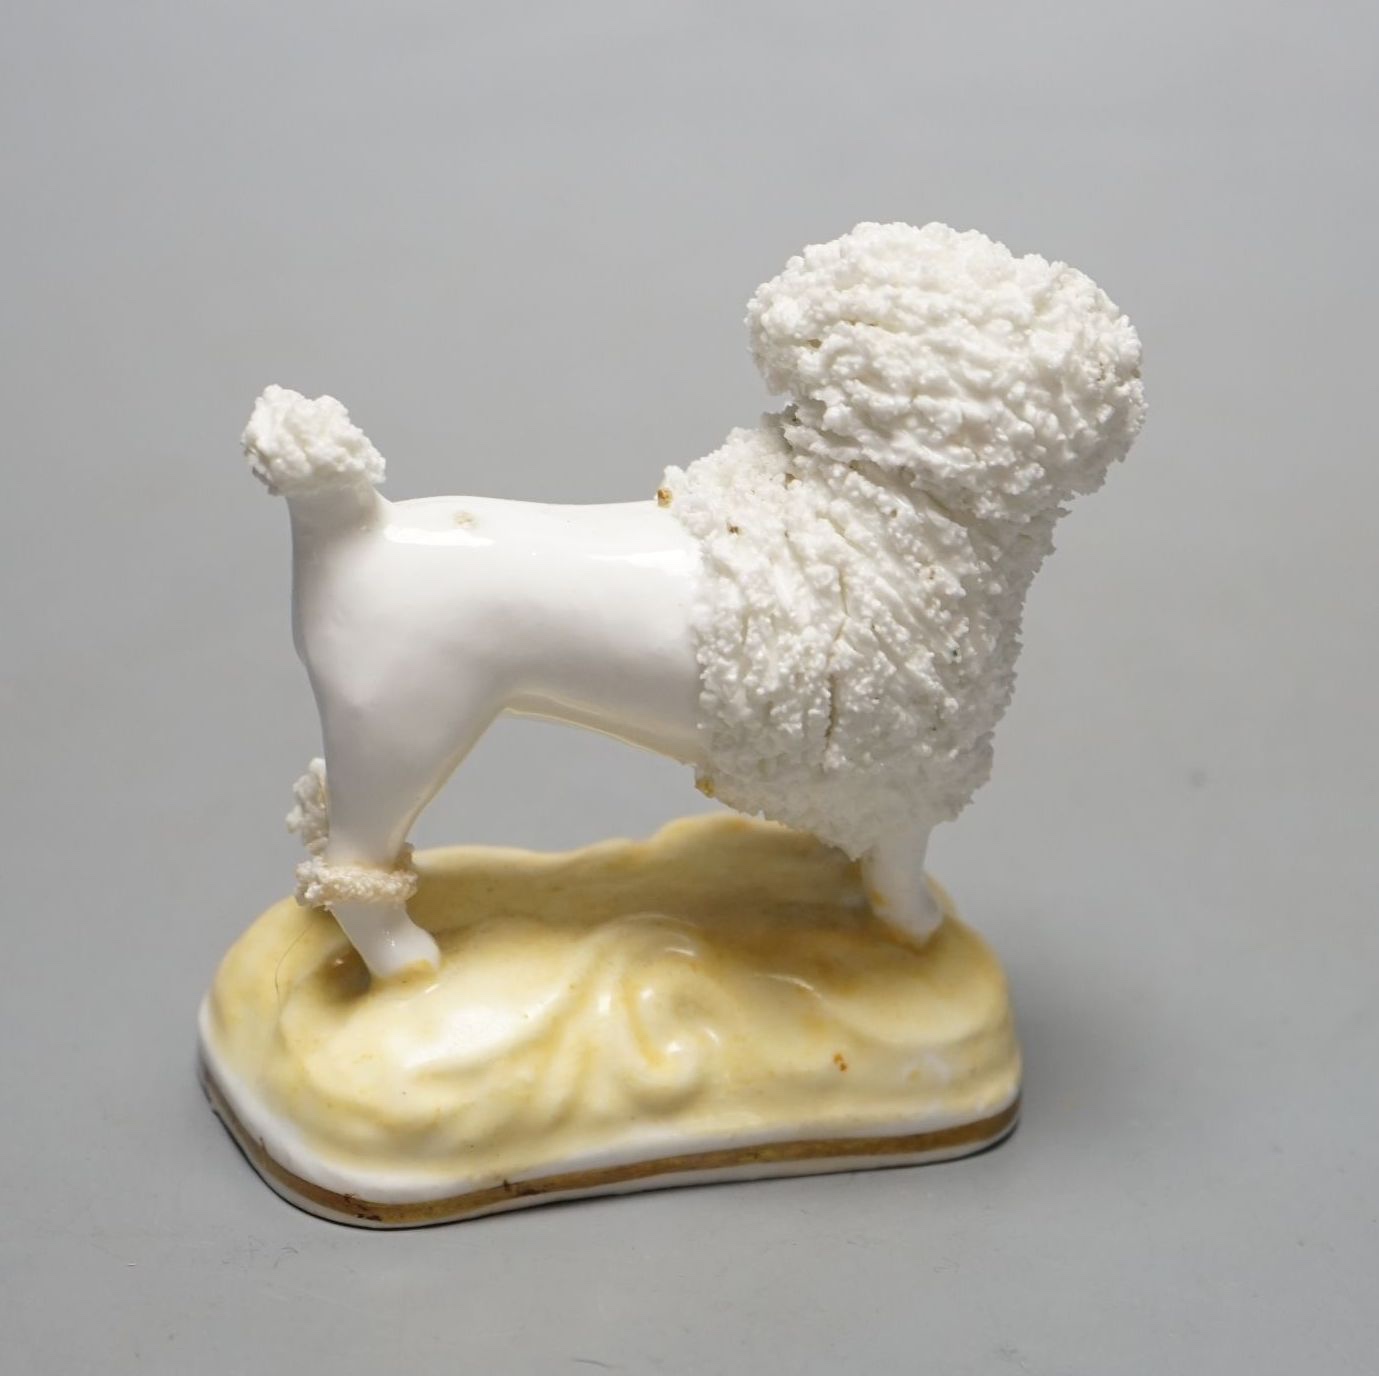 A rare Samuel Alcock porcelain figure of a standing poodle holding a hat in its mouth, c.1835-50, impressed ‘17’, Provenance: Dennis G. Rice collection, apparently an unrecorded model when Dr Rice published his book., 8.